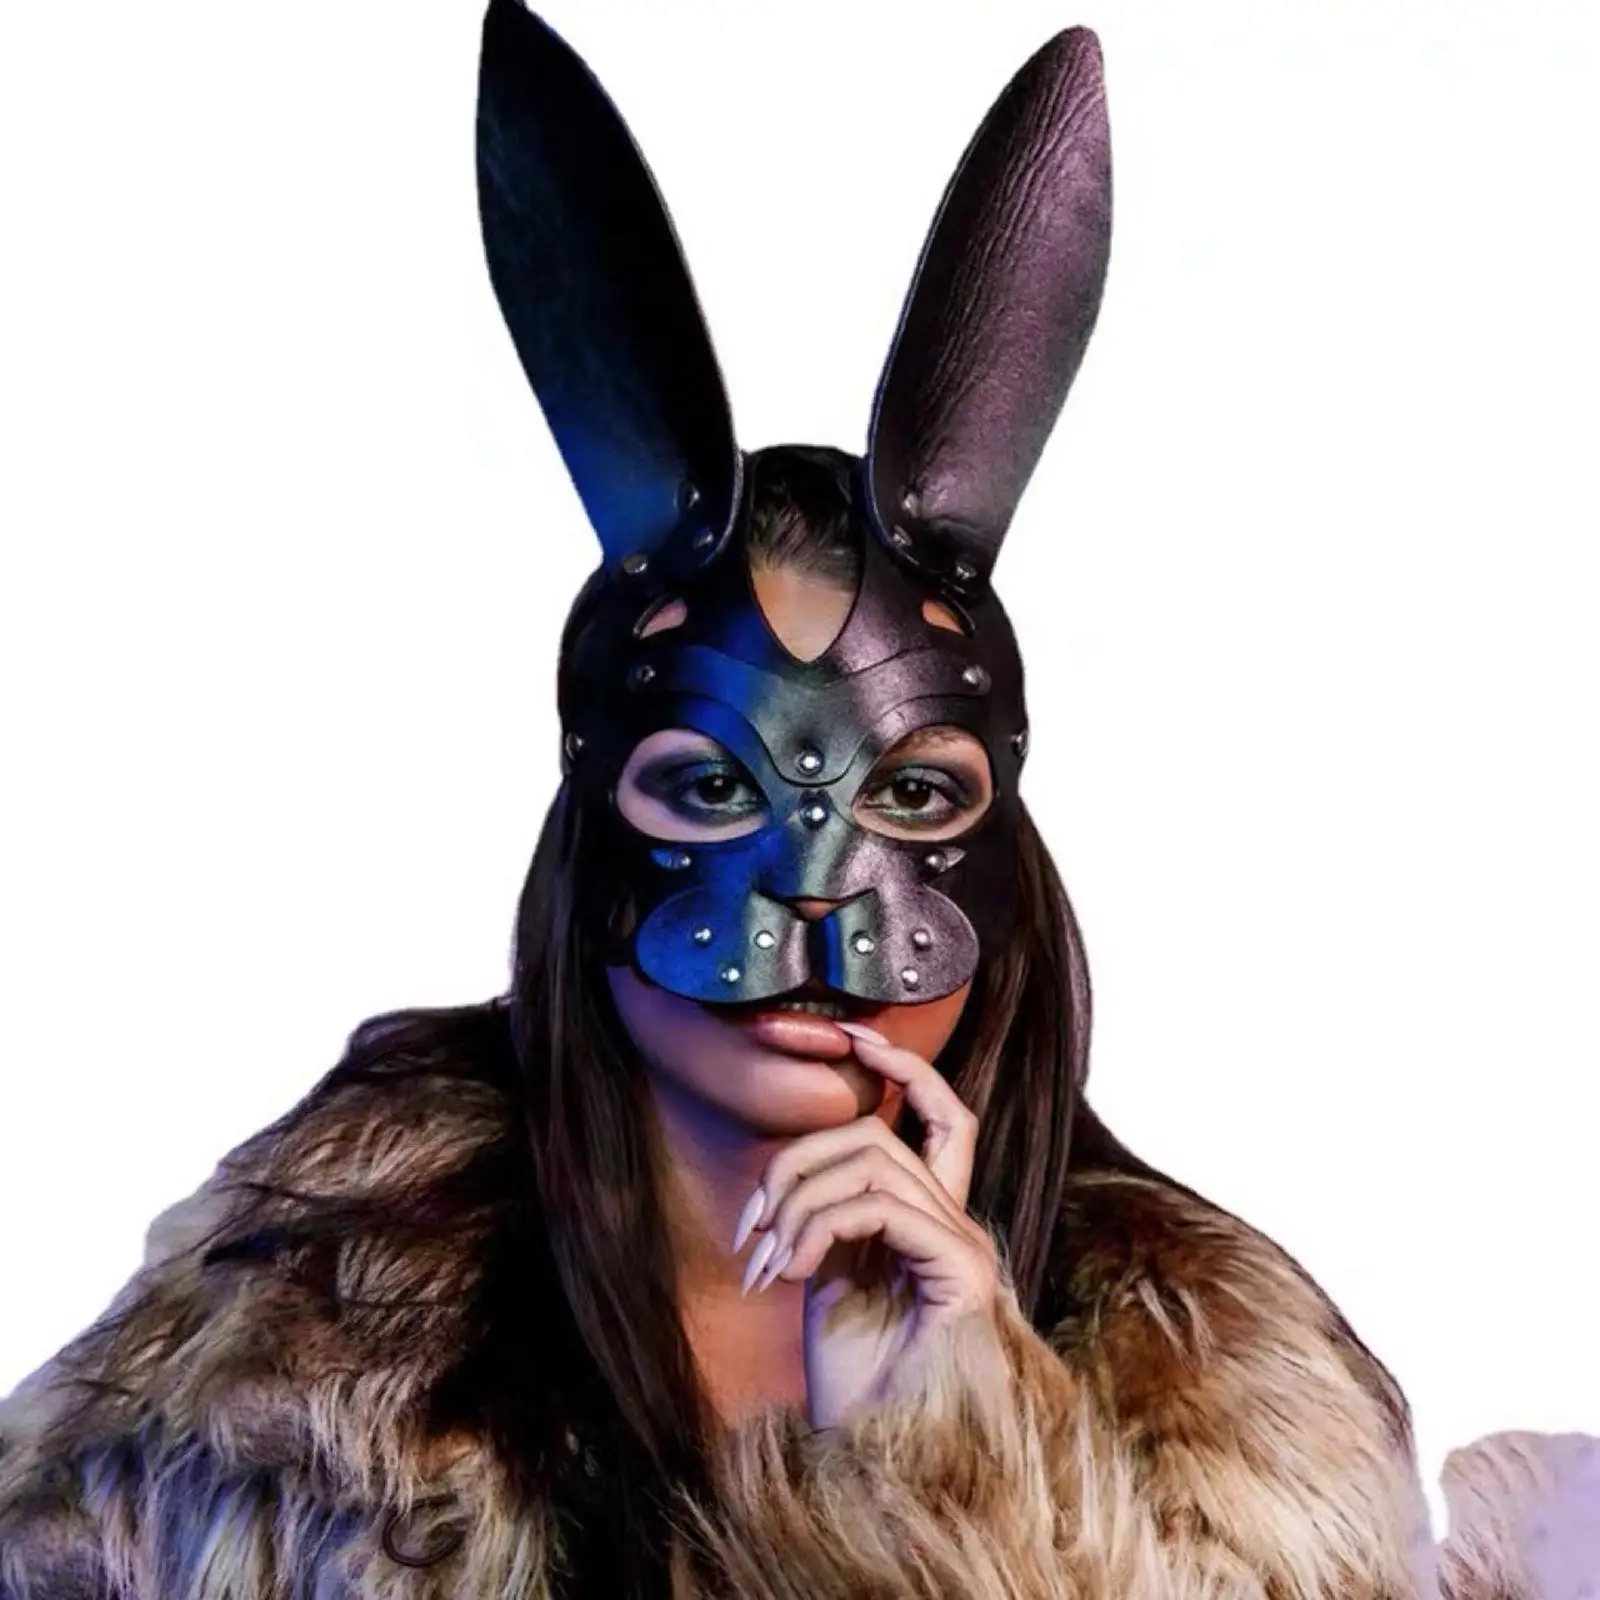 Rabbit Mask Women Props Cosplay Lightweight Women Costume Mask for Party